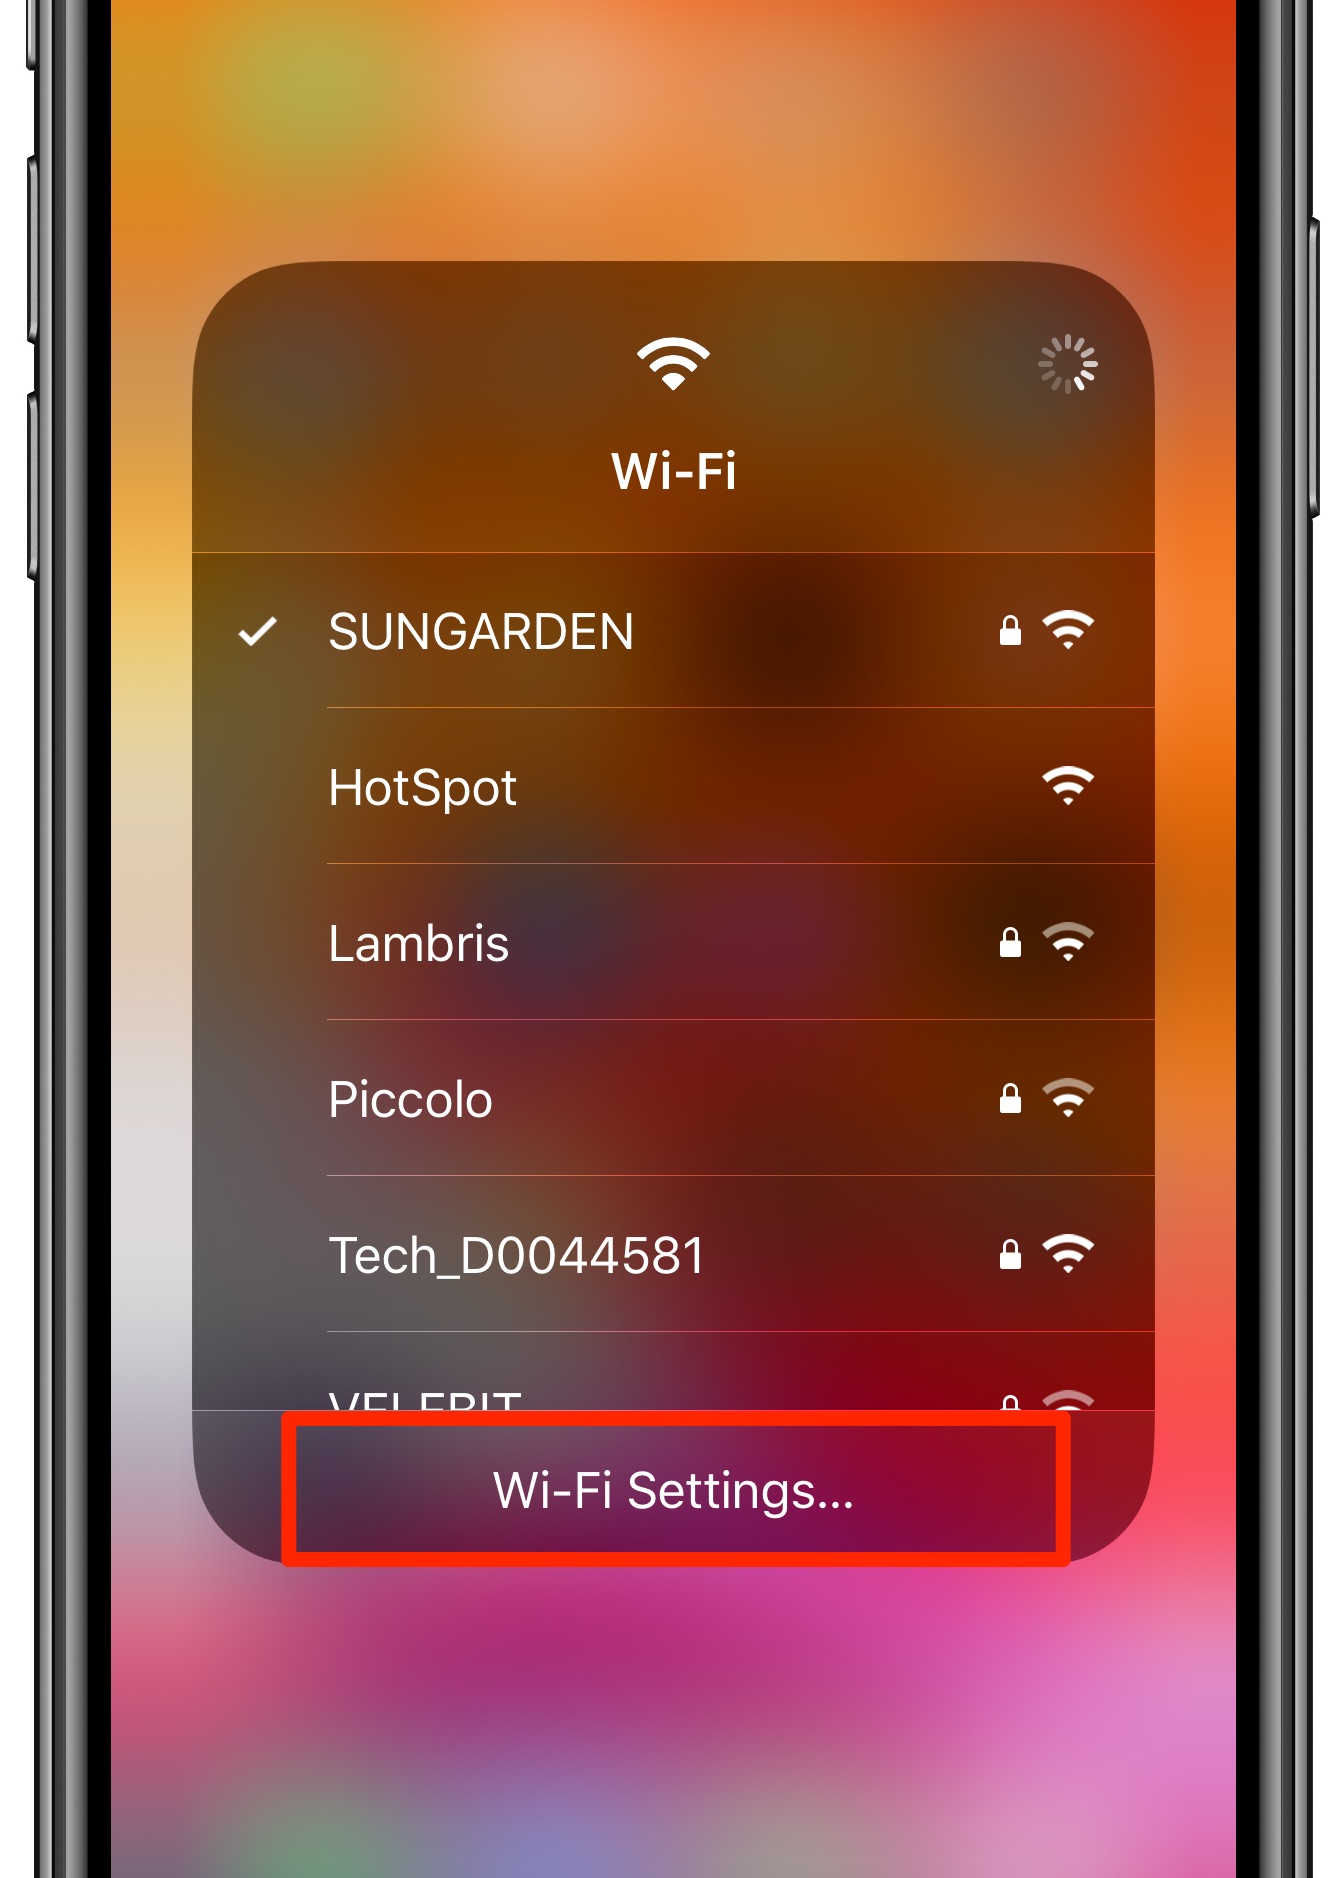 Wi-Fi Settings button in iPhone Control Center